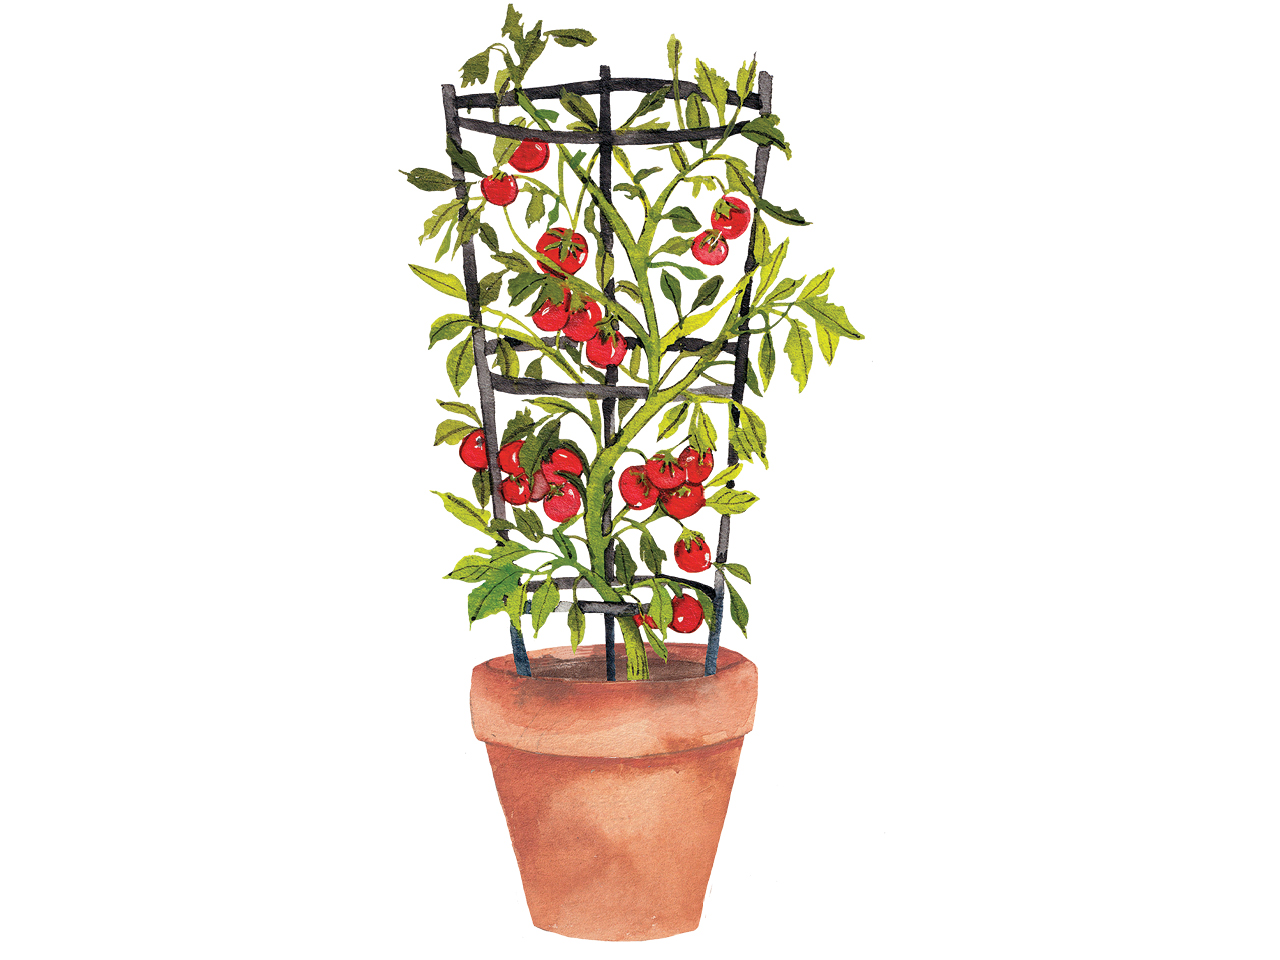 An illustration of a tomato plant growing in a terracotta pot against a white background.